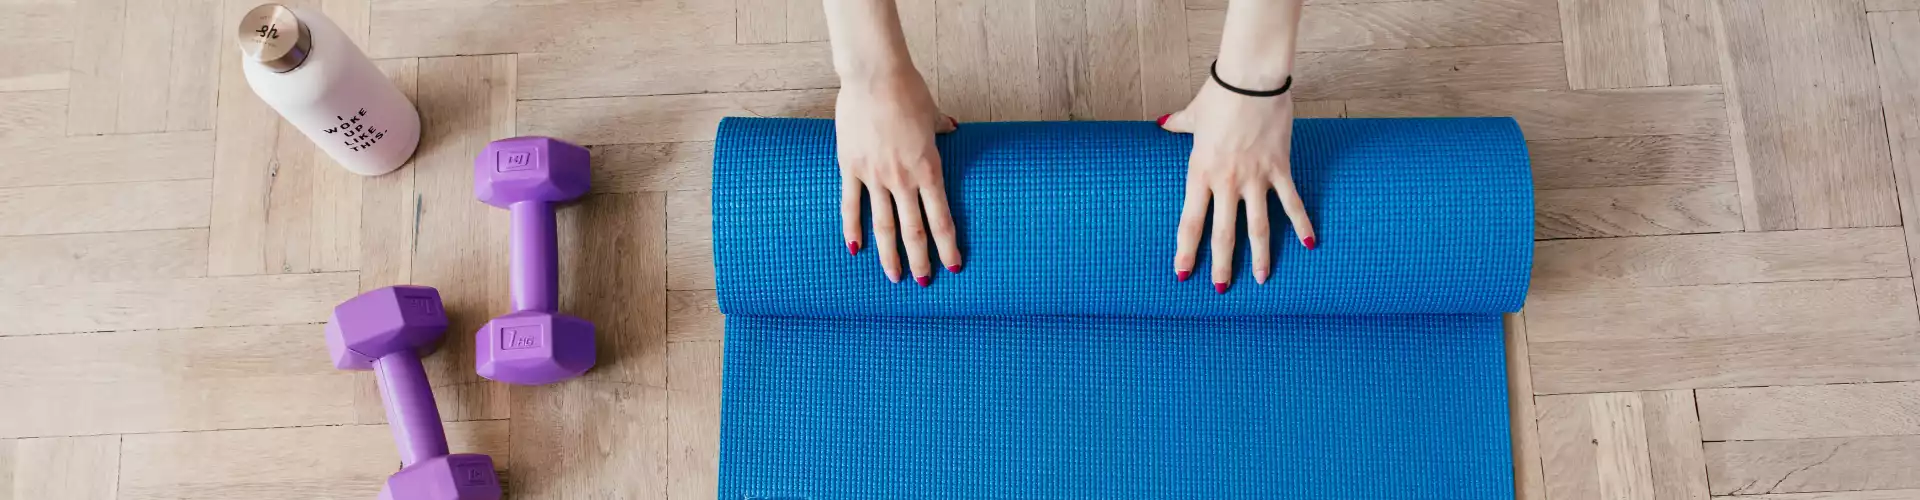 Mat Pilates - basic concepts and exercises for beginner to intermediate level